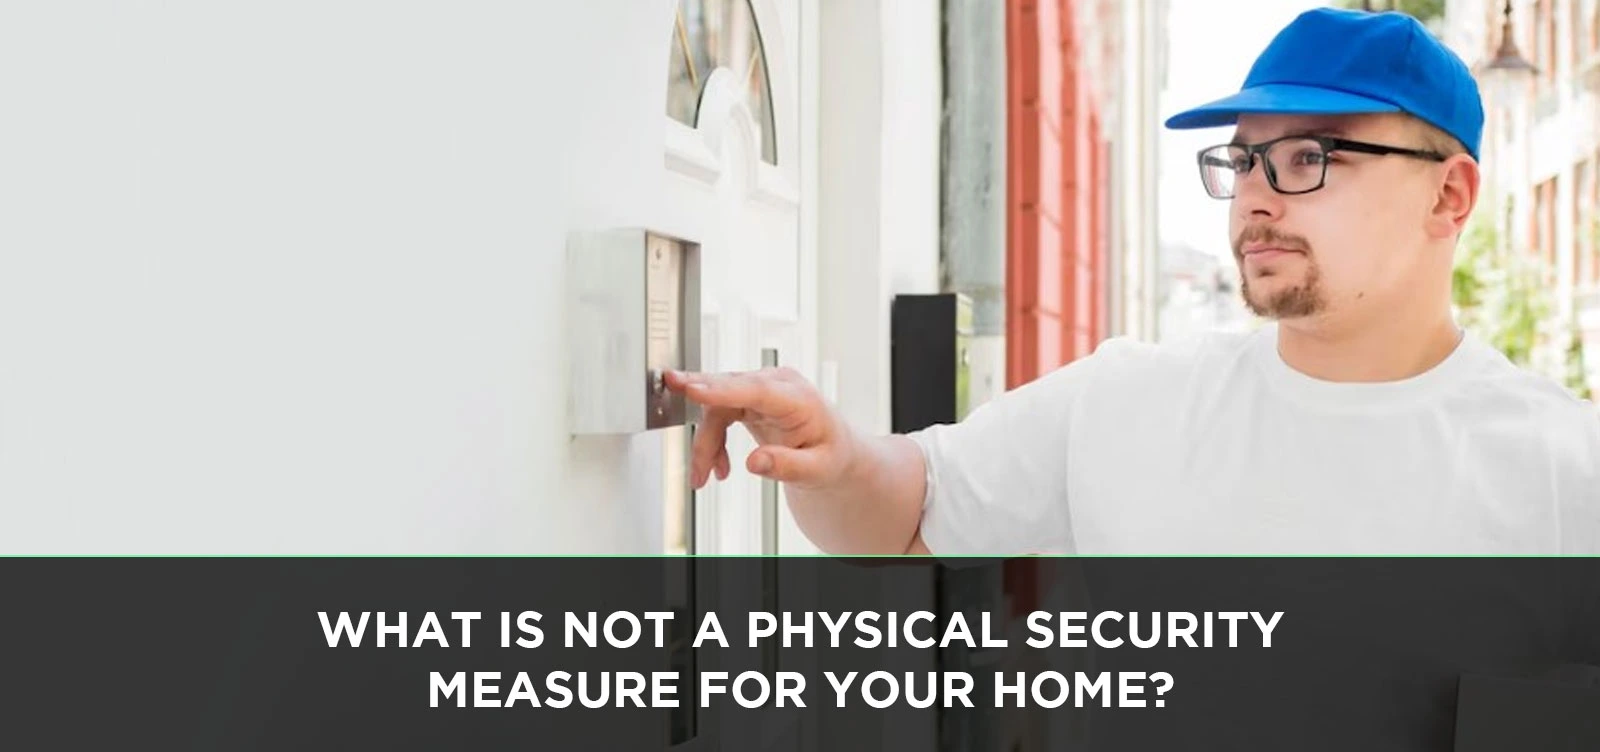 What is not a Physical Security Measure for Your Home